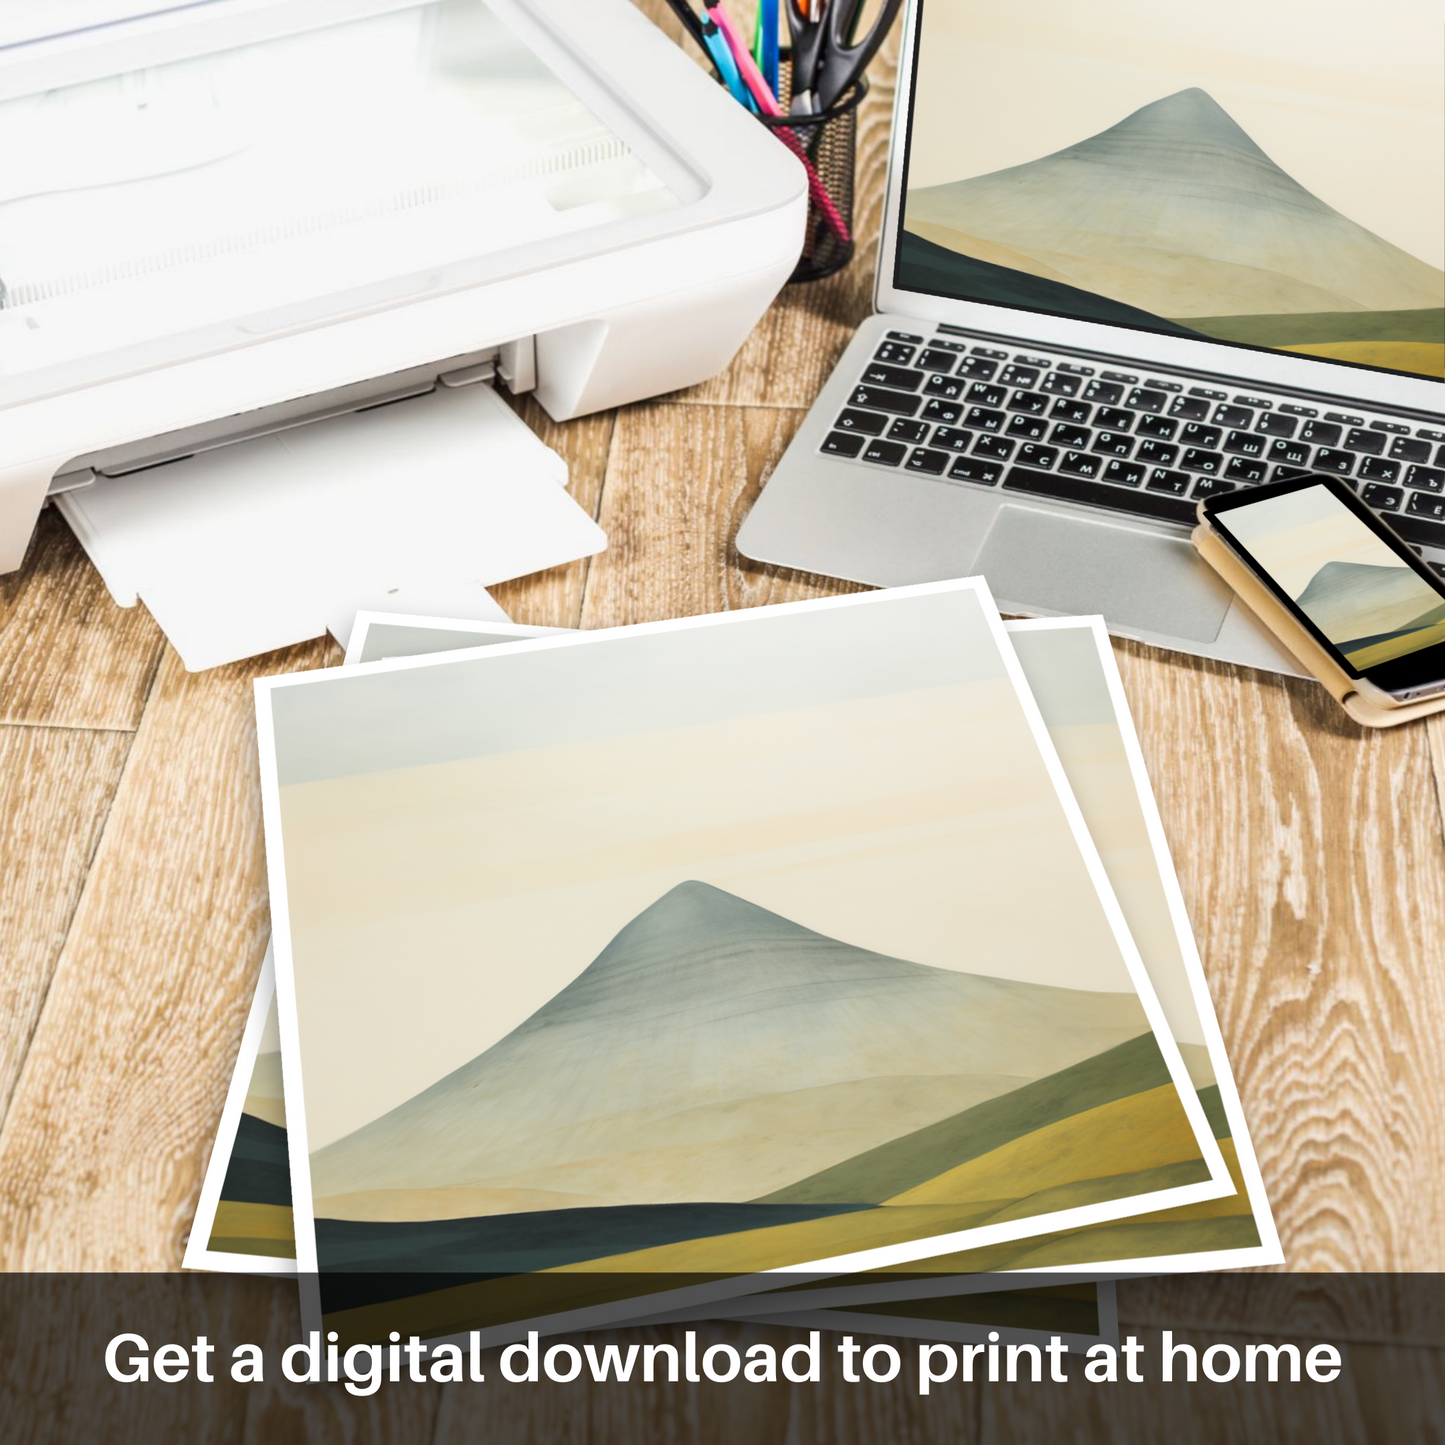 Downloadable and printable picture of Meall Garbh (Càrn Mairg)